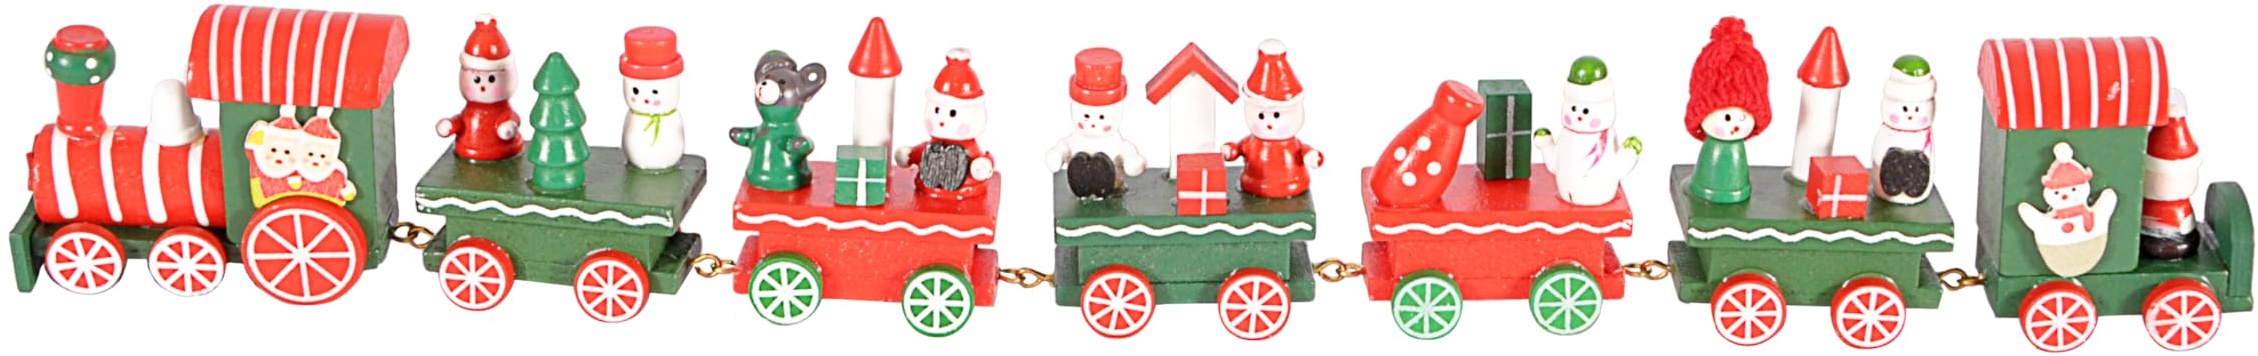 Ciao Christmas Train (42cm: Locomotive + 6 Wagons) Wooden Decoration, red/Green